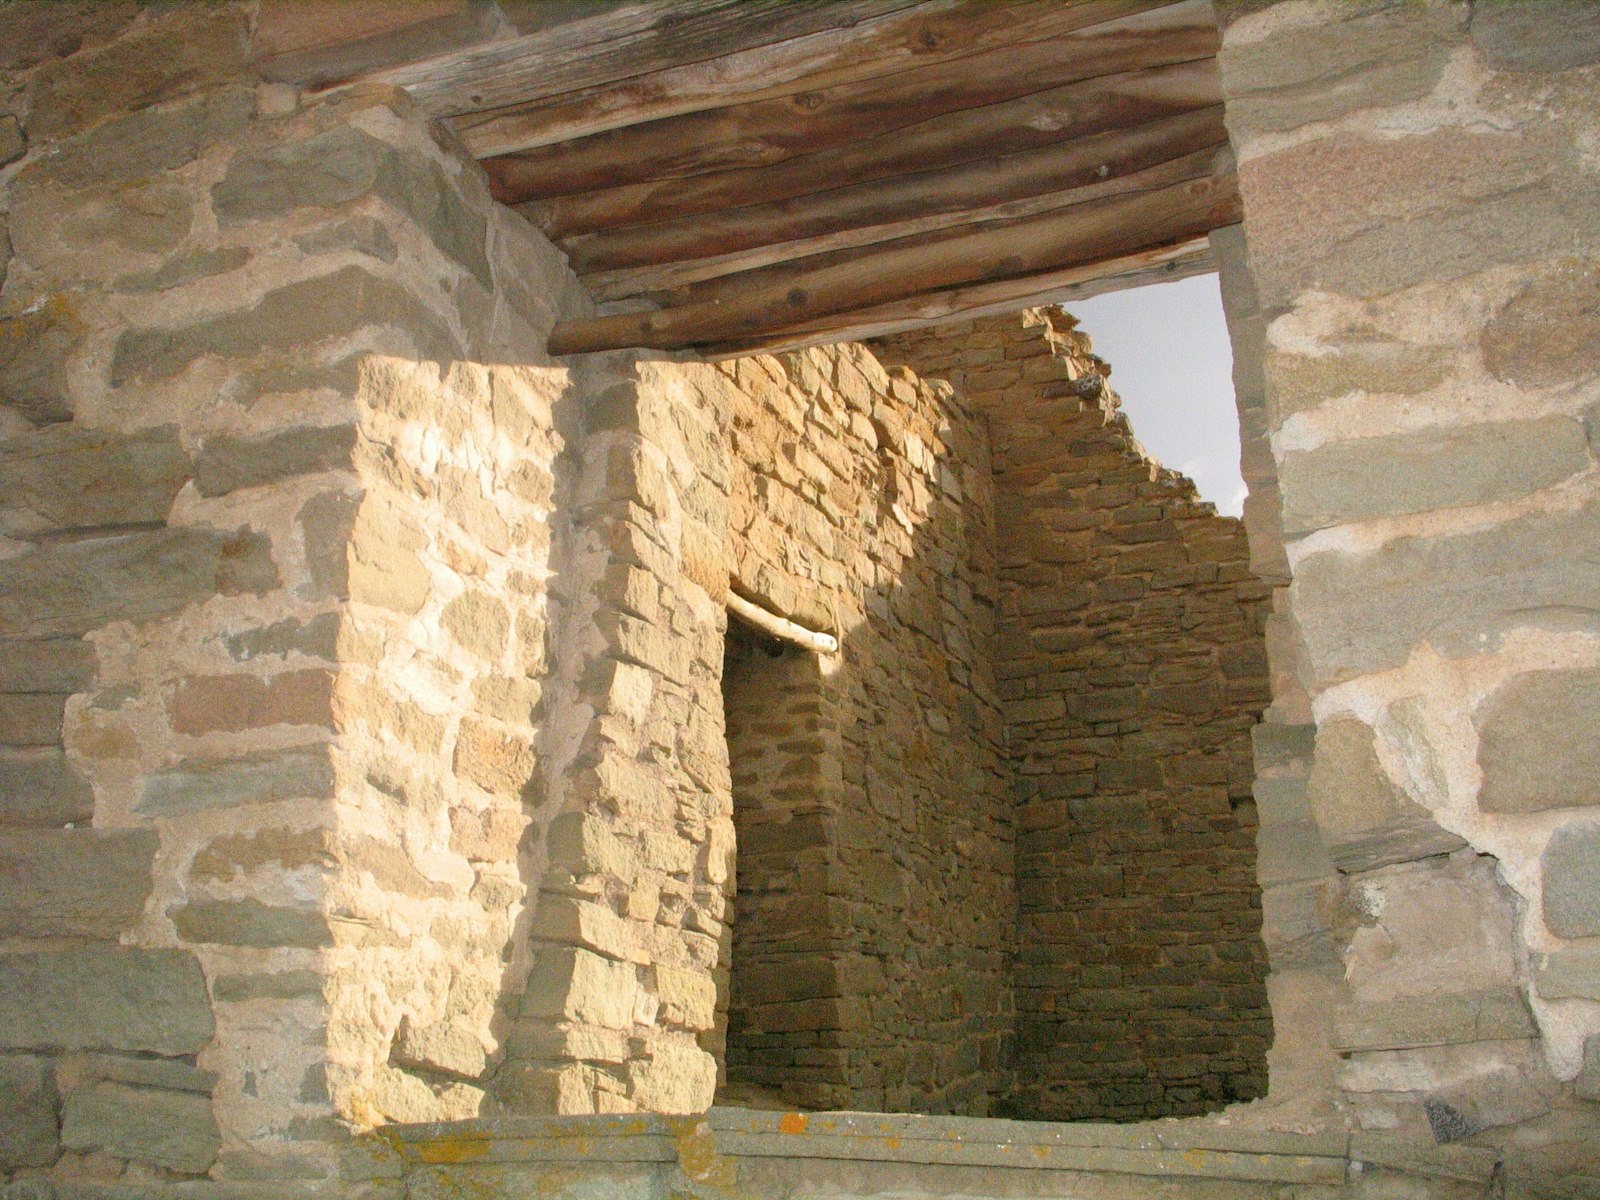 A stone doorway leads into other stone rooms